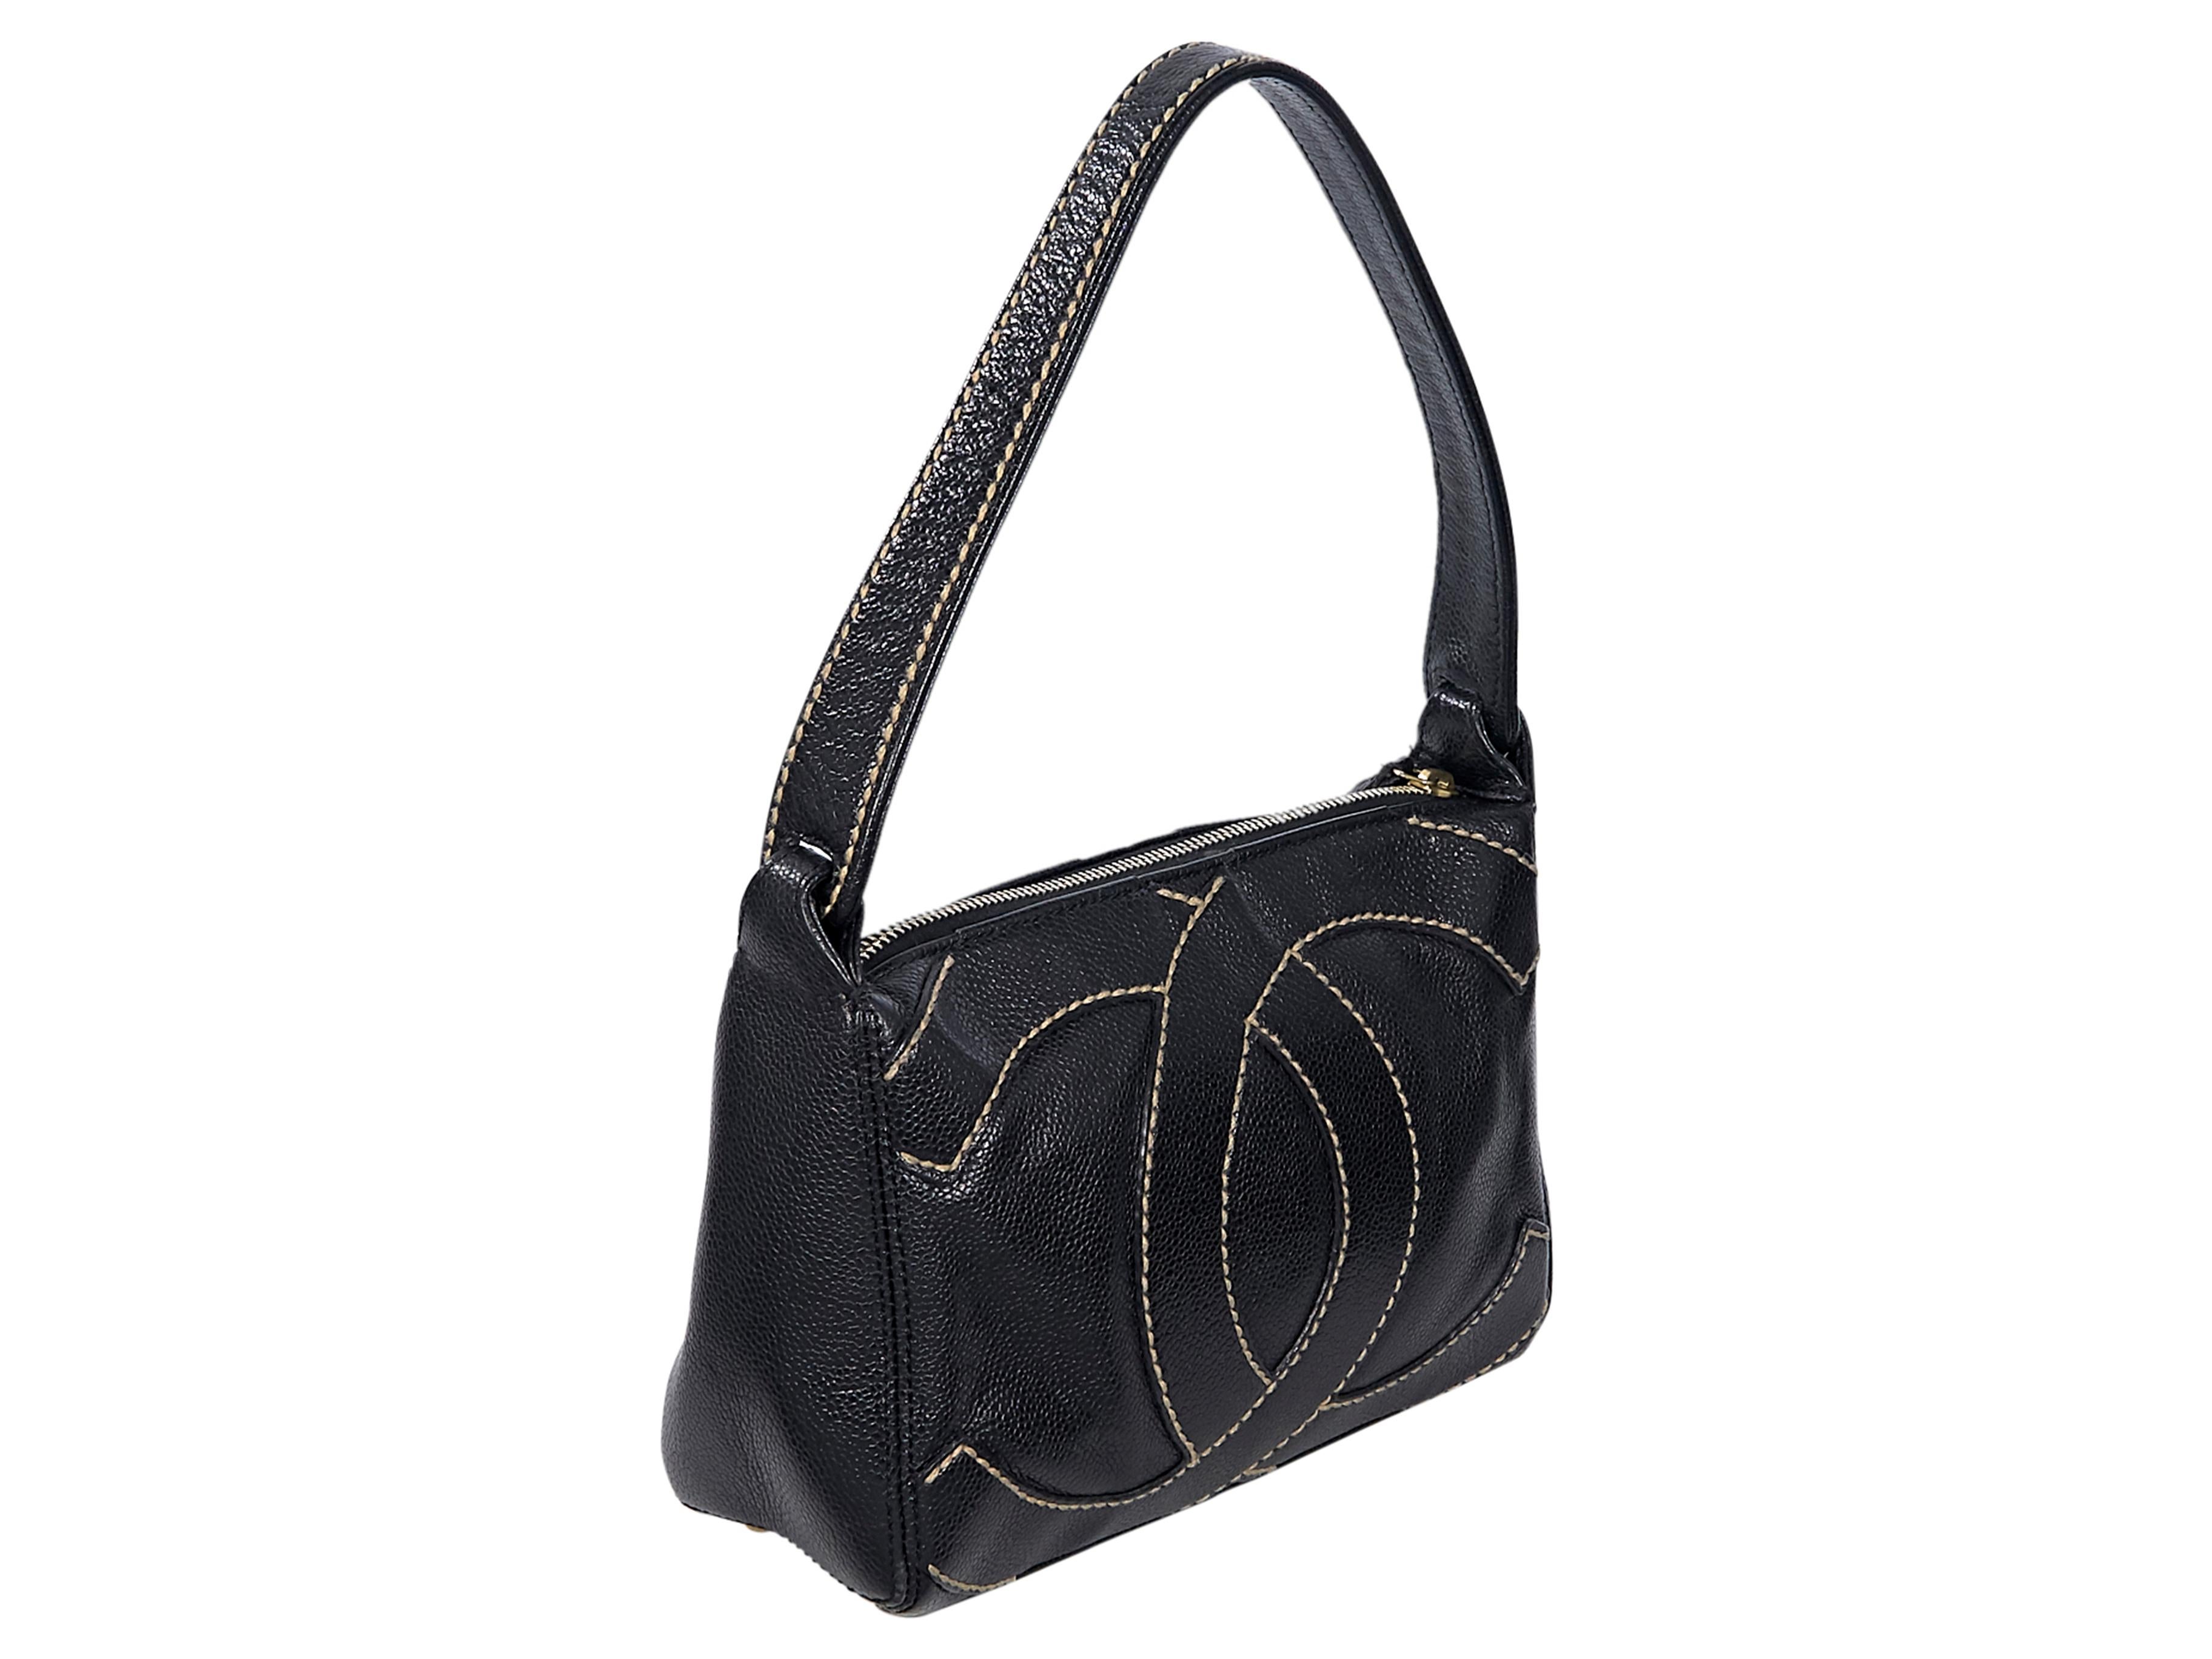 Product details:  Black leather CC logo embossed shoulder bag by Chanel.  Contrast stitching. Single shoulder strap. Top zip closure. Lined interior with inner slide and zip pockets.  Protective metal feet.  Gold-tone hardware. 9